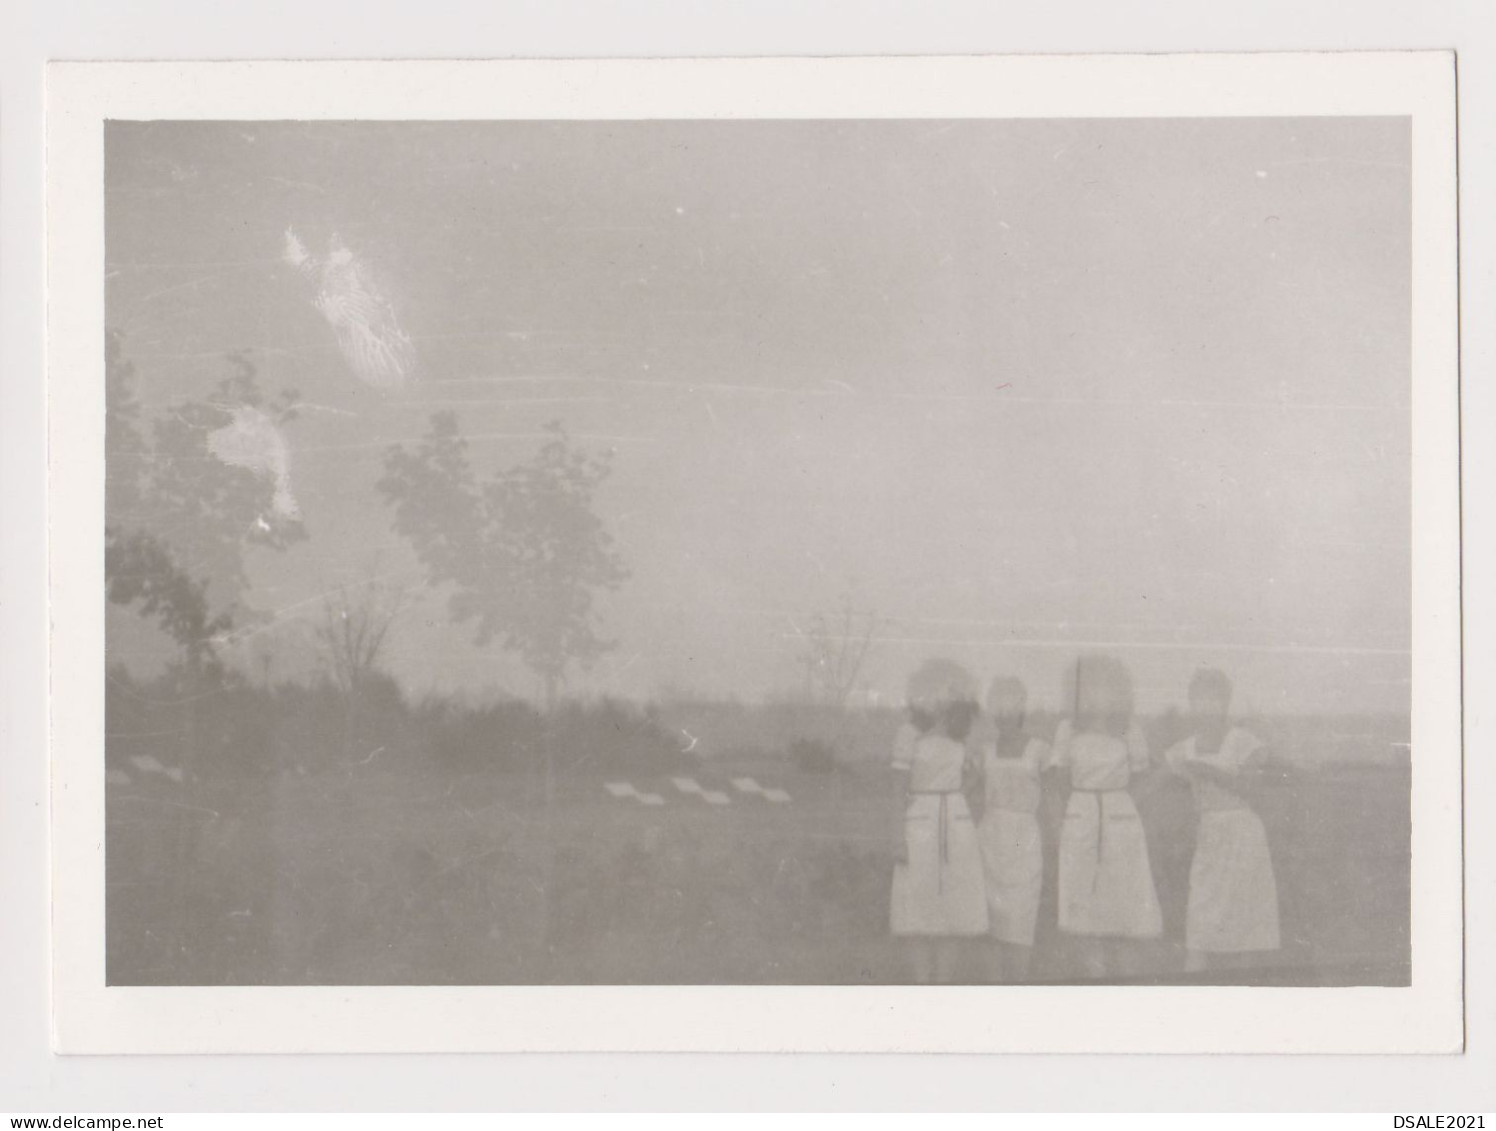 Landscape, Four Person Ghost View, Film Error, Odd Scene, Abstract Surreal Vintage Orig Photo 12.9x9.1cm. (1030) - Objects